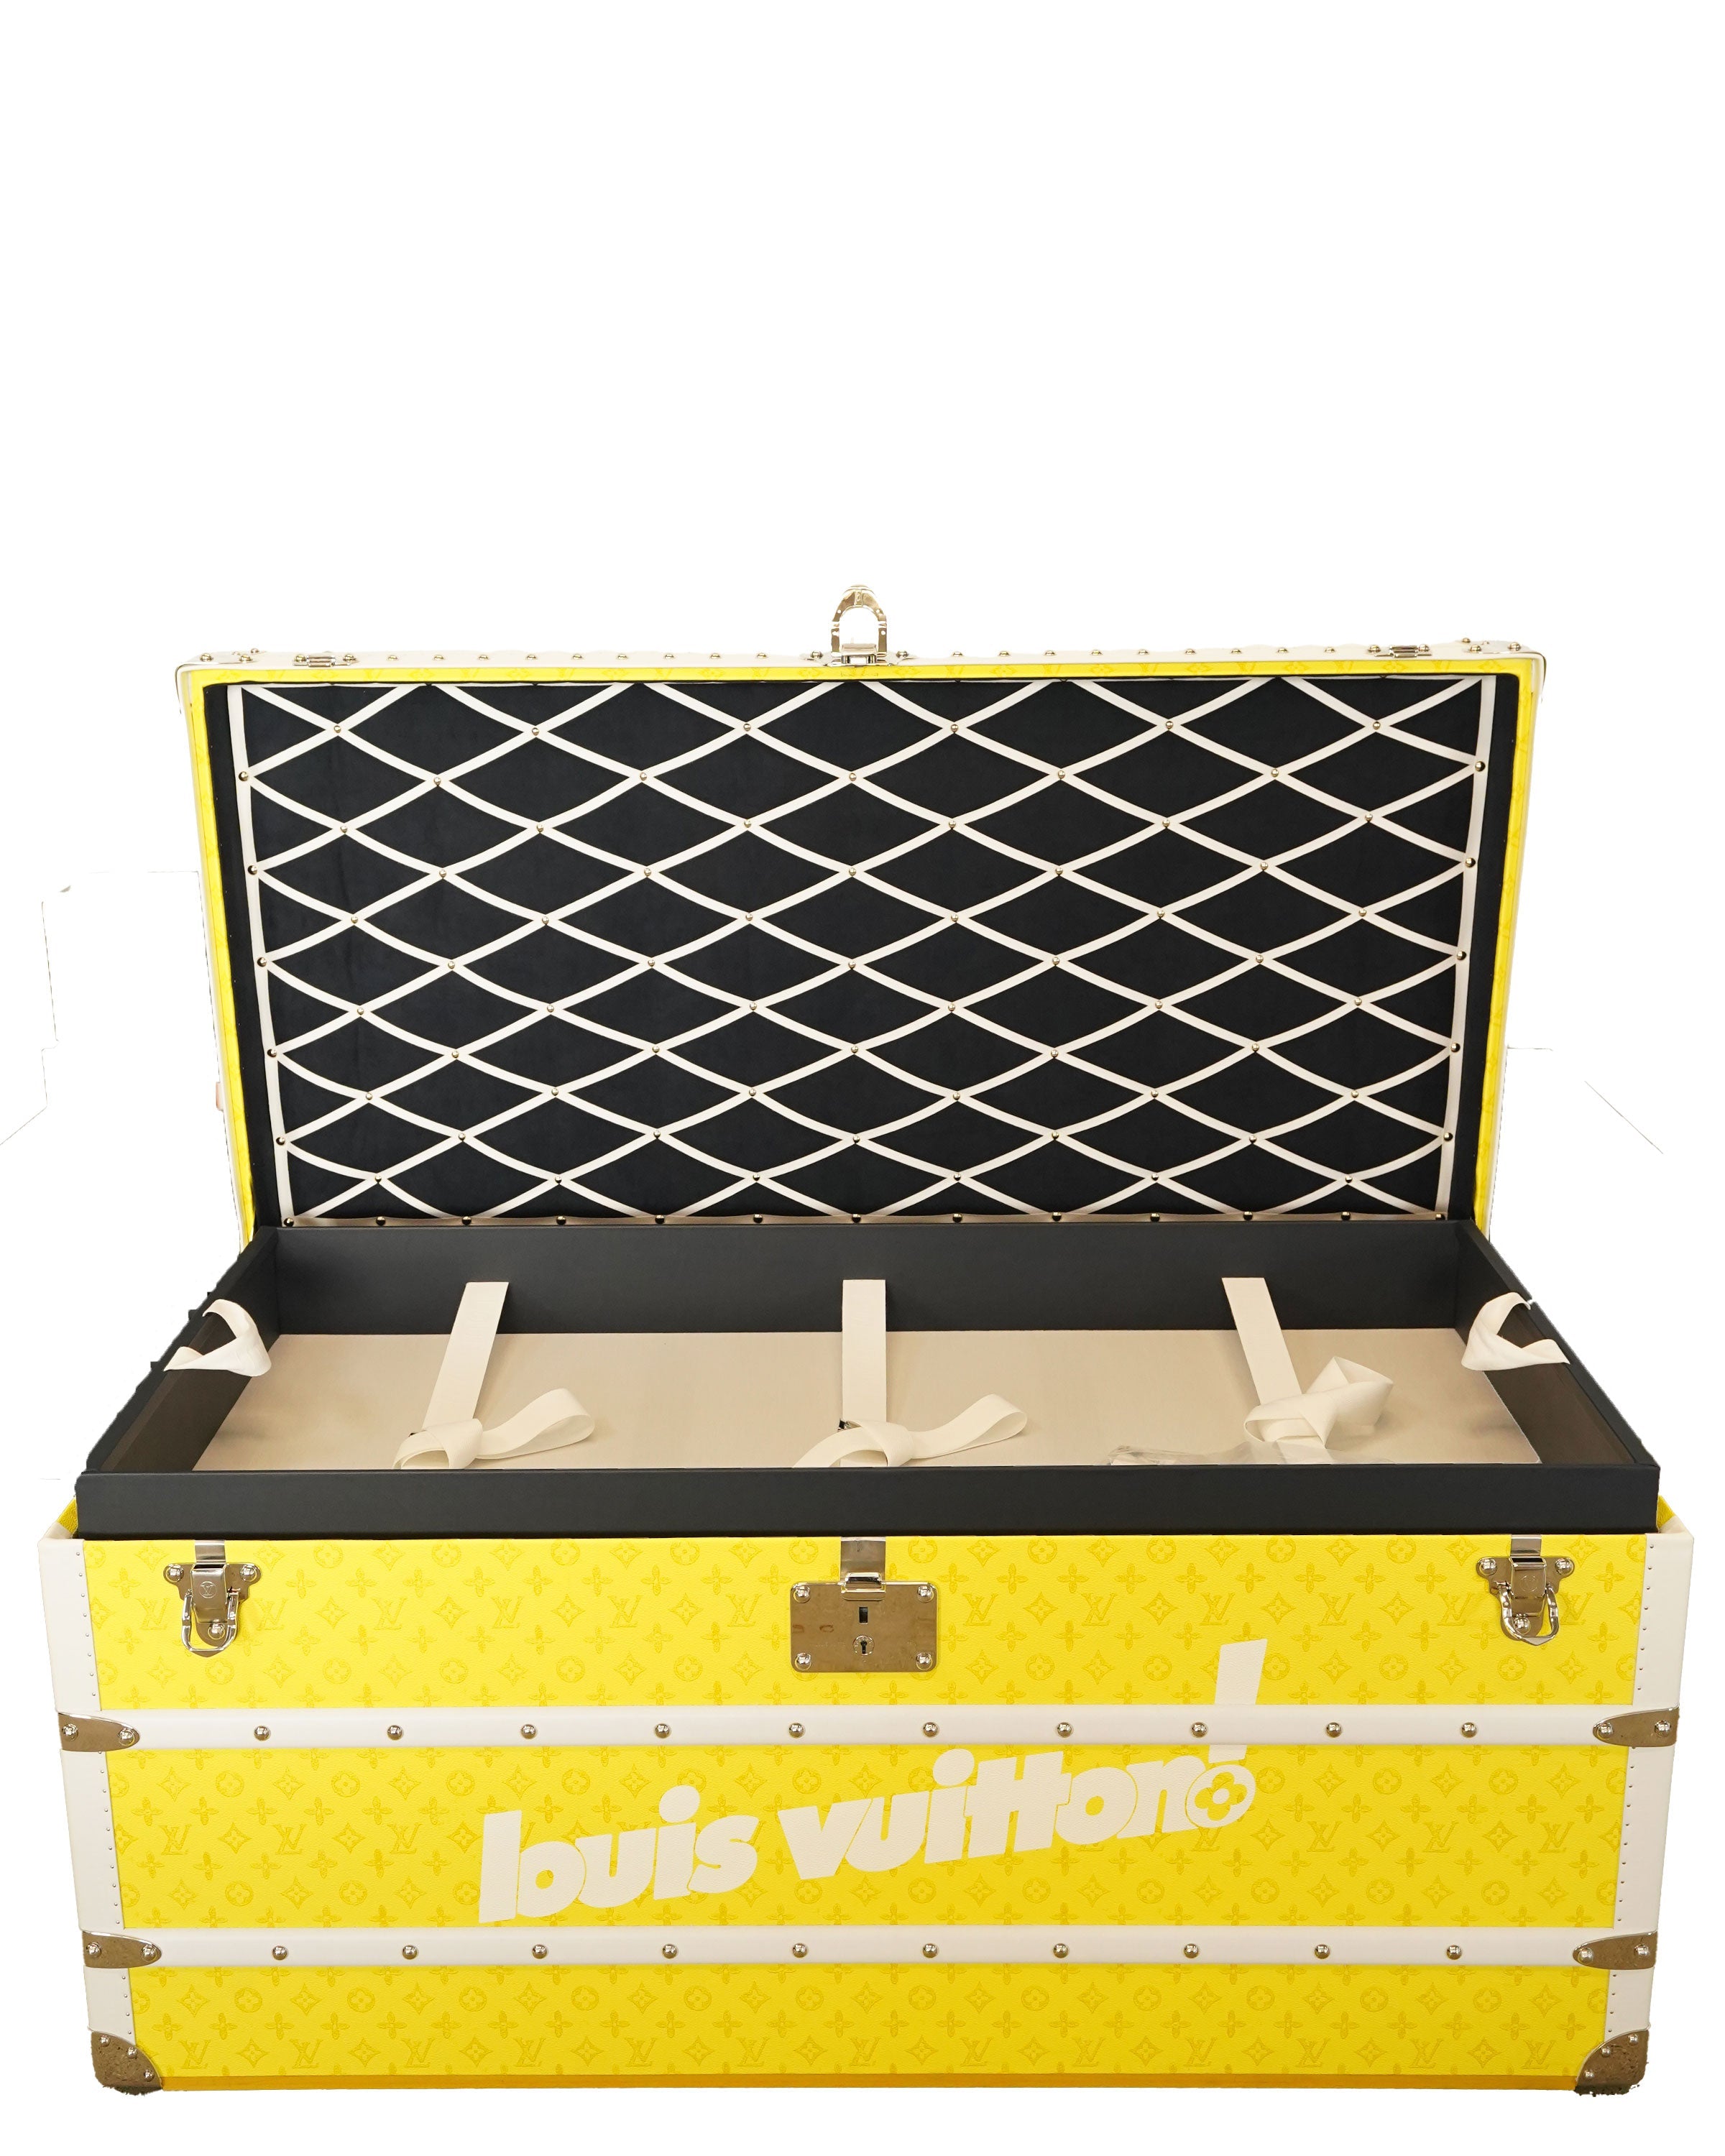 Limited Edition Yellow Steamer Trunk by Virgil Abloh (2021)